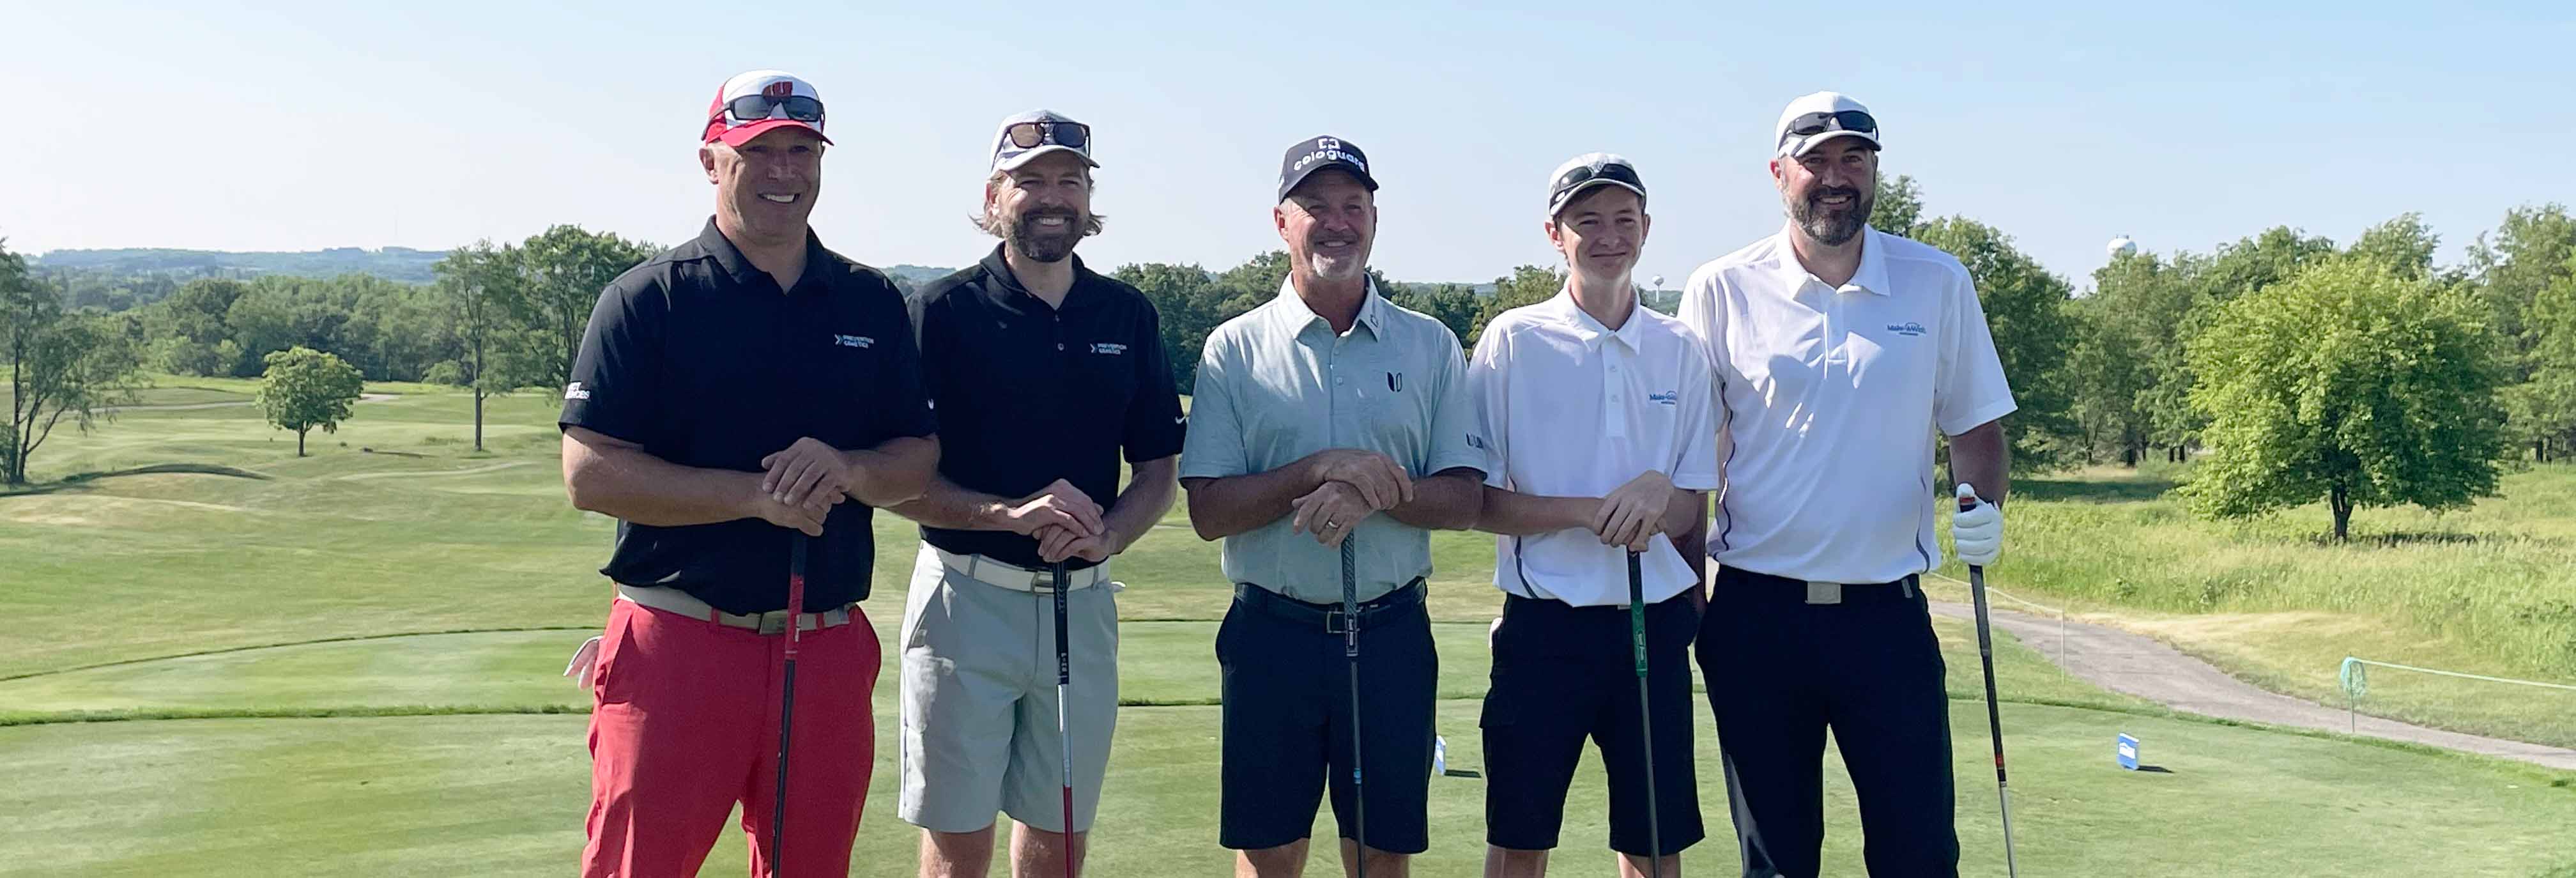 Group of five golfers standing at golf course